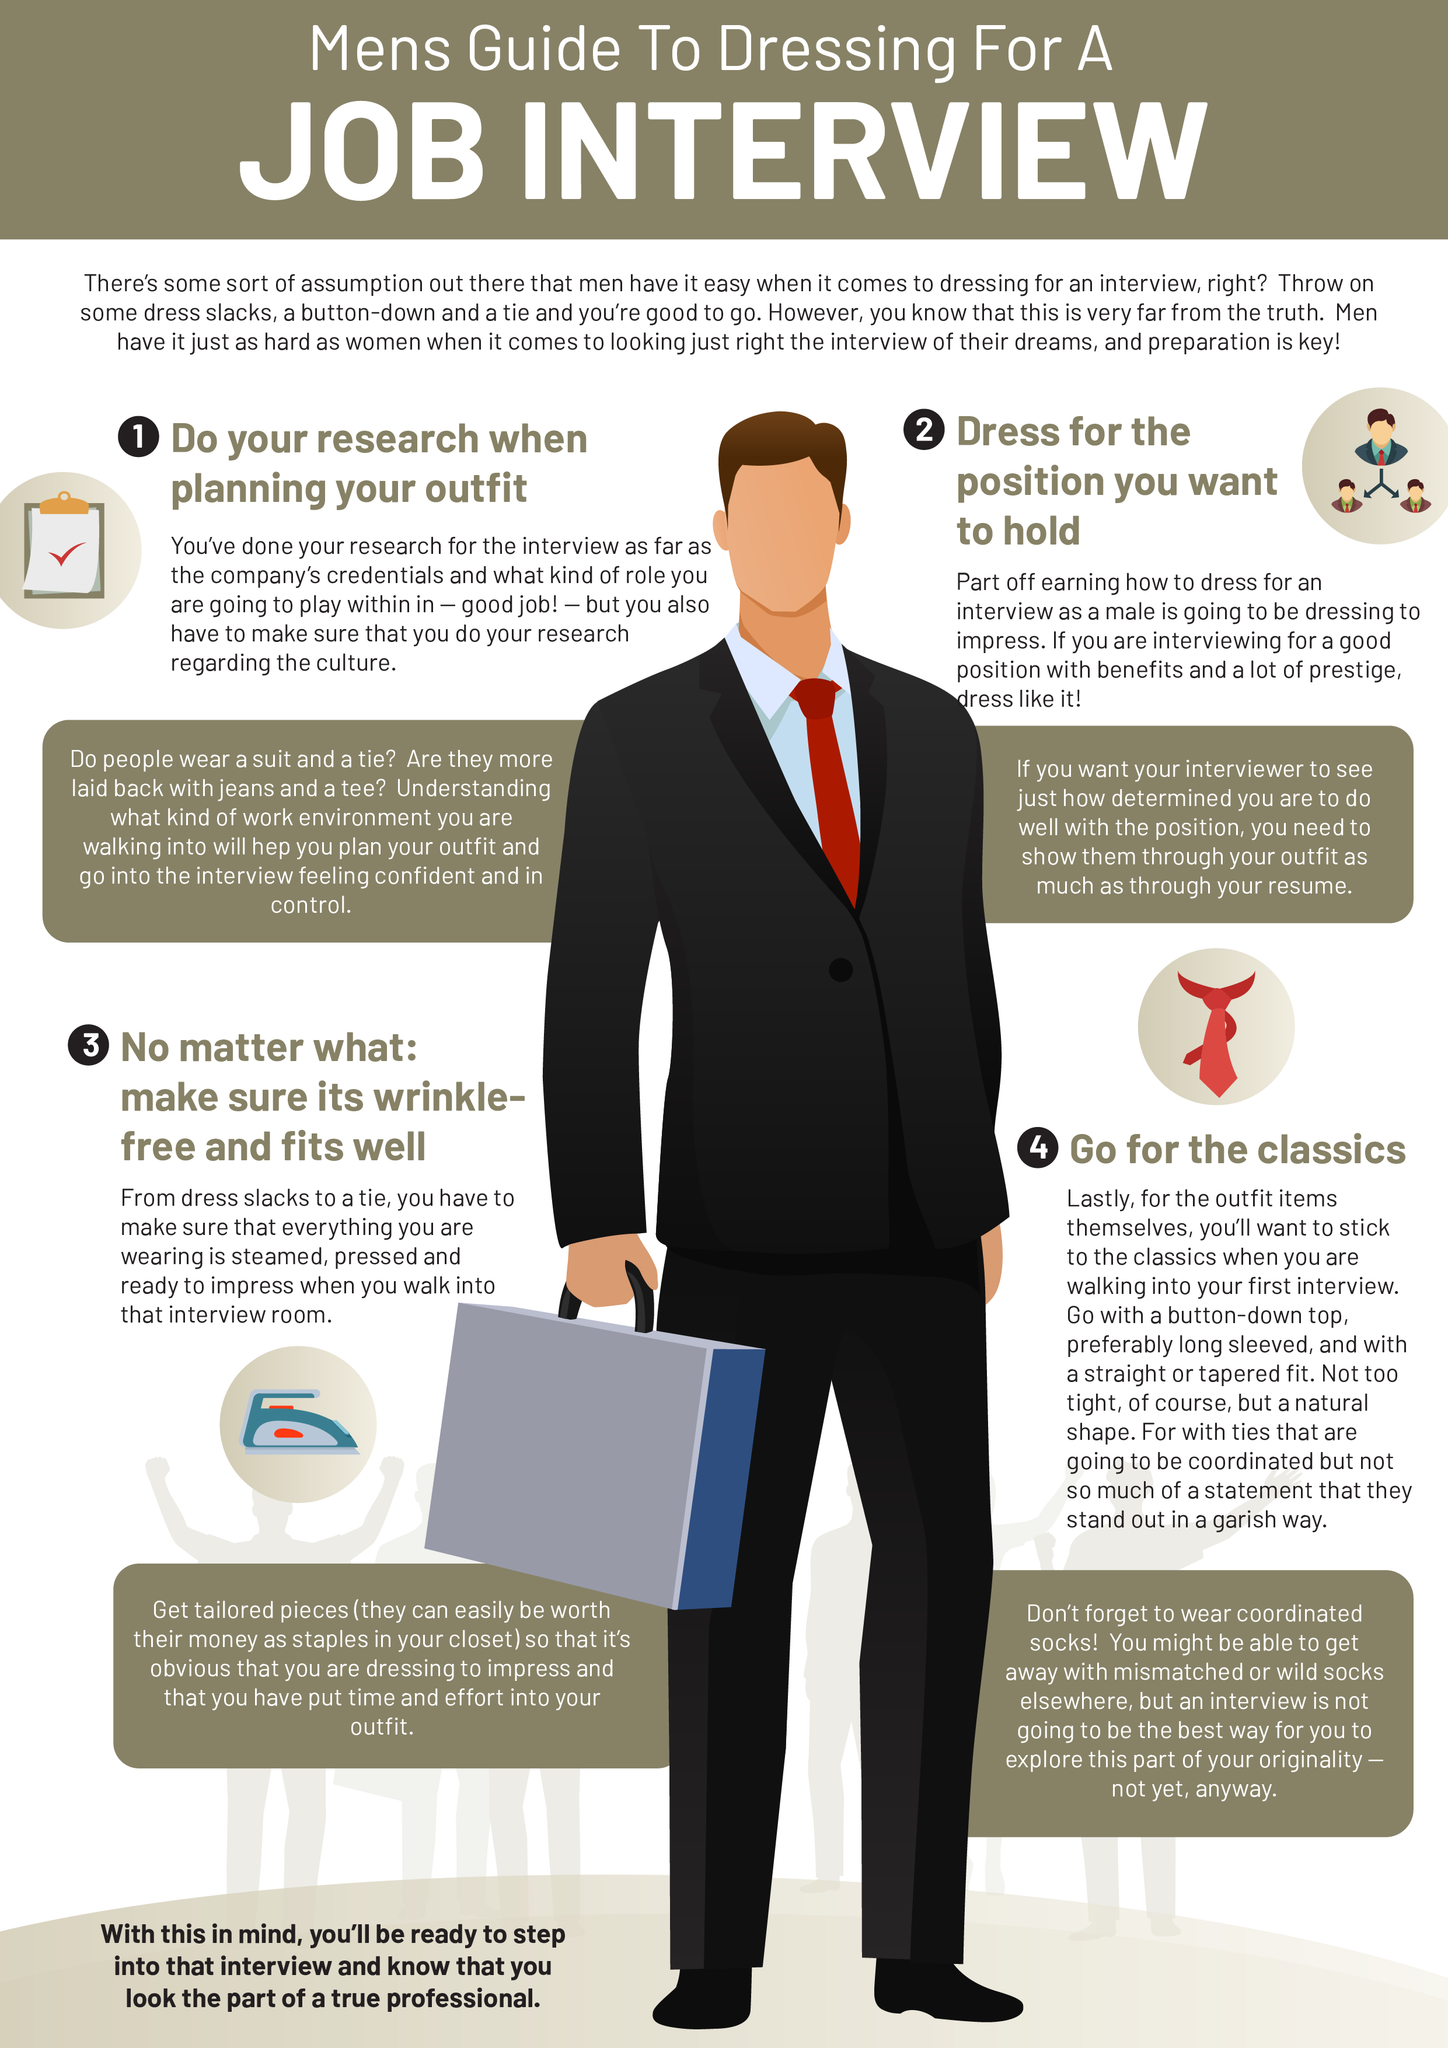 What Suit To Wear To A Job Interview: Men's Guide On Dressing For